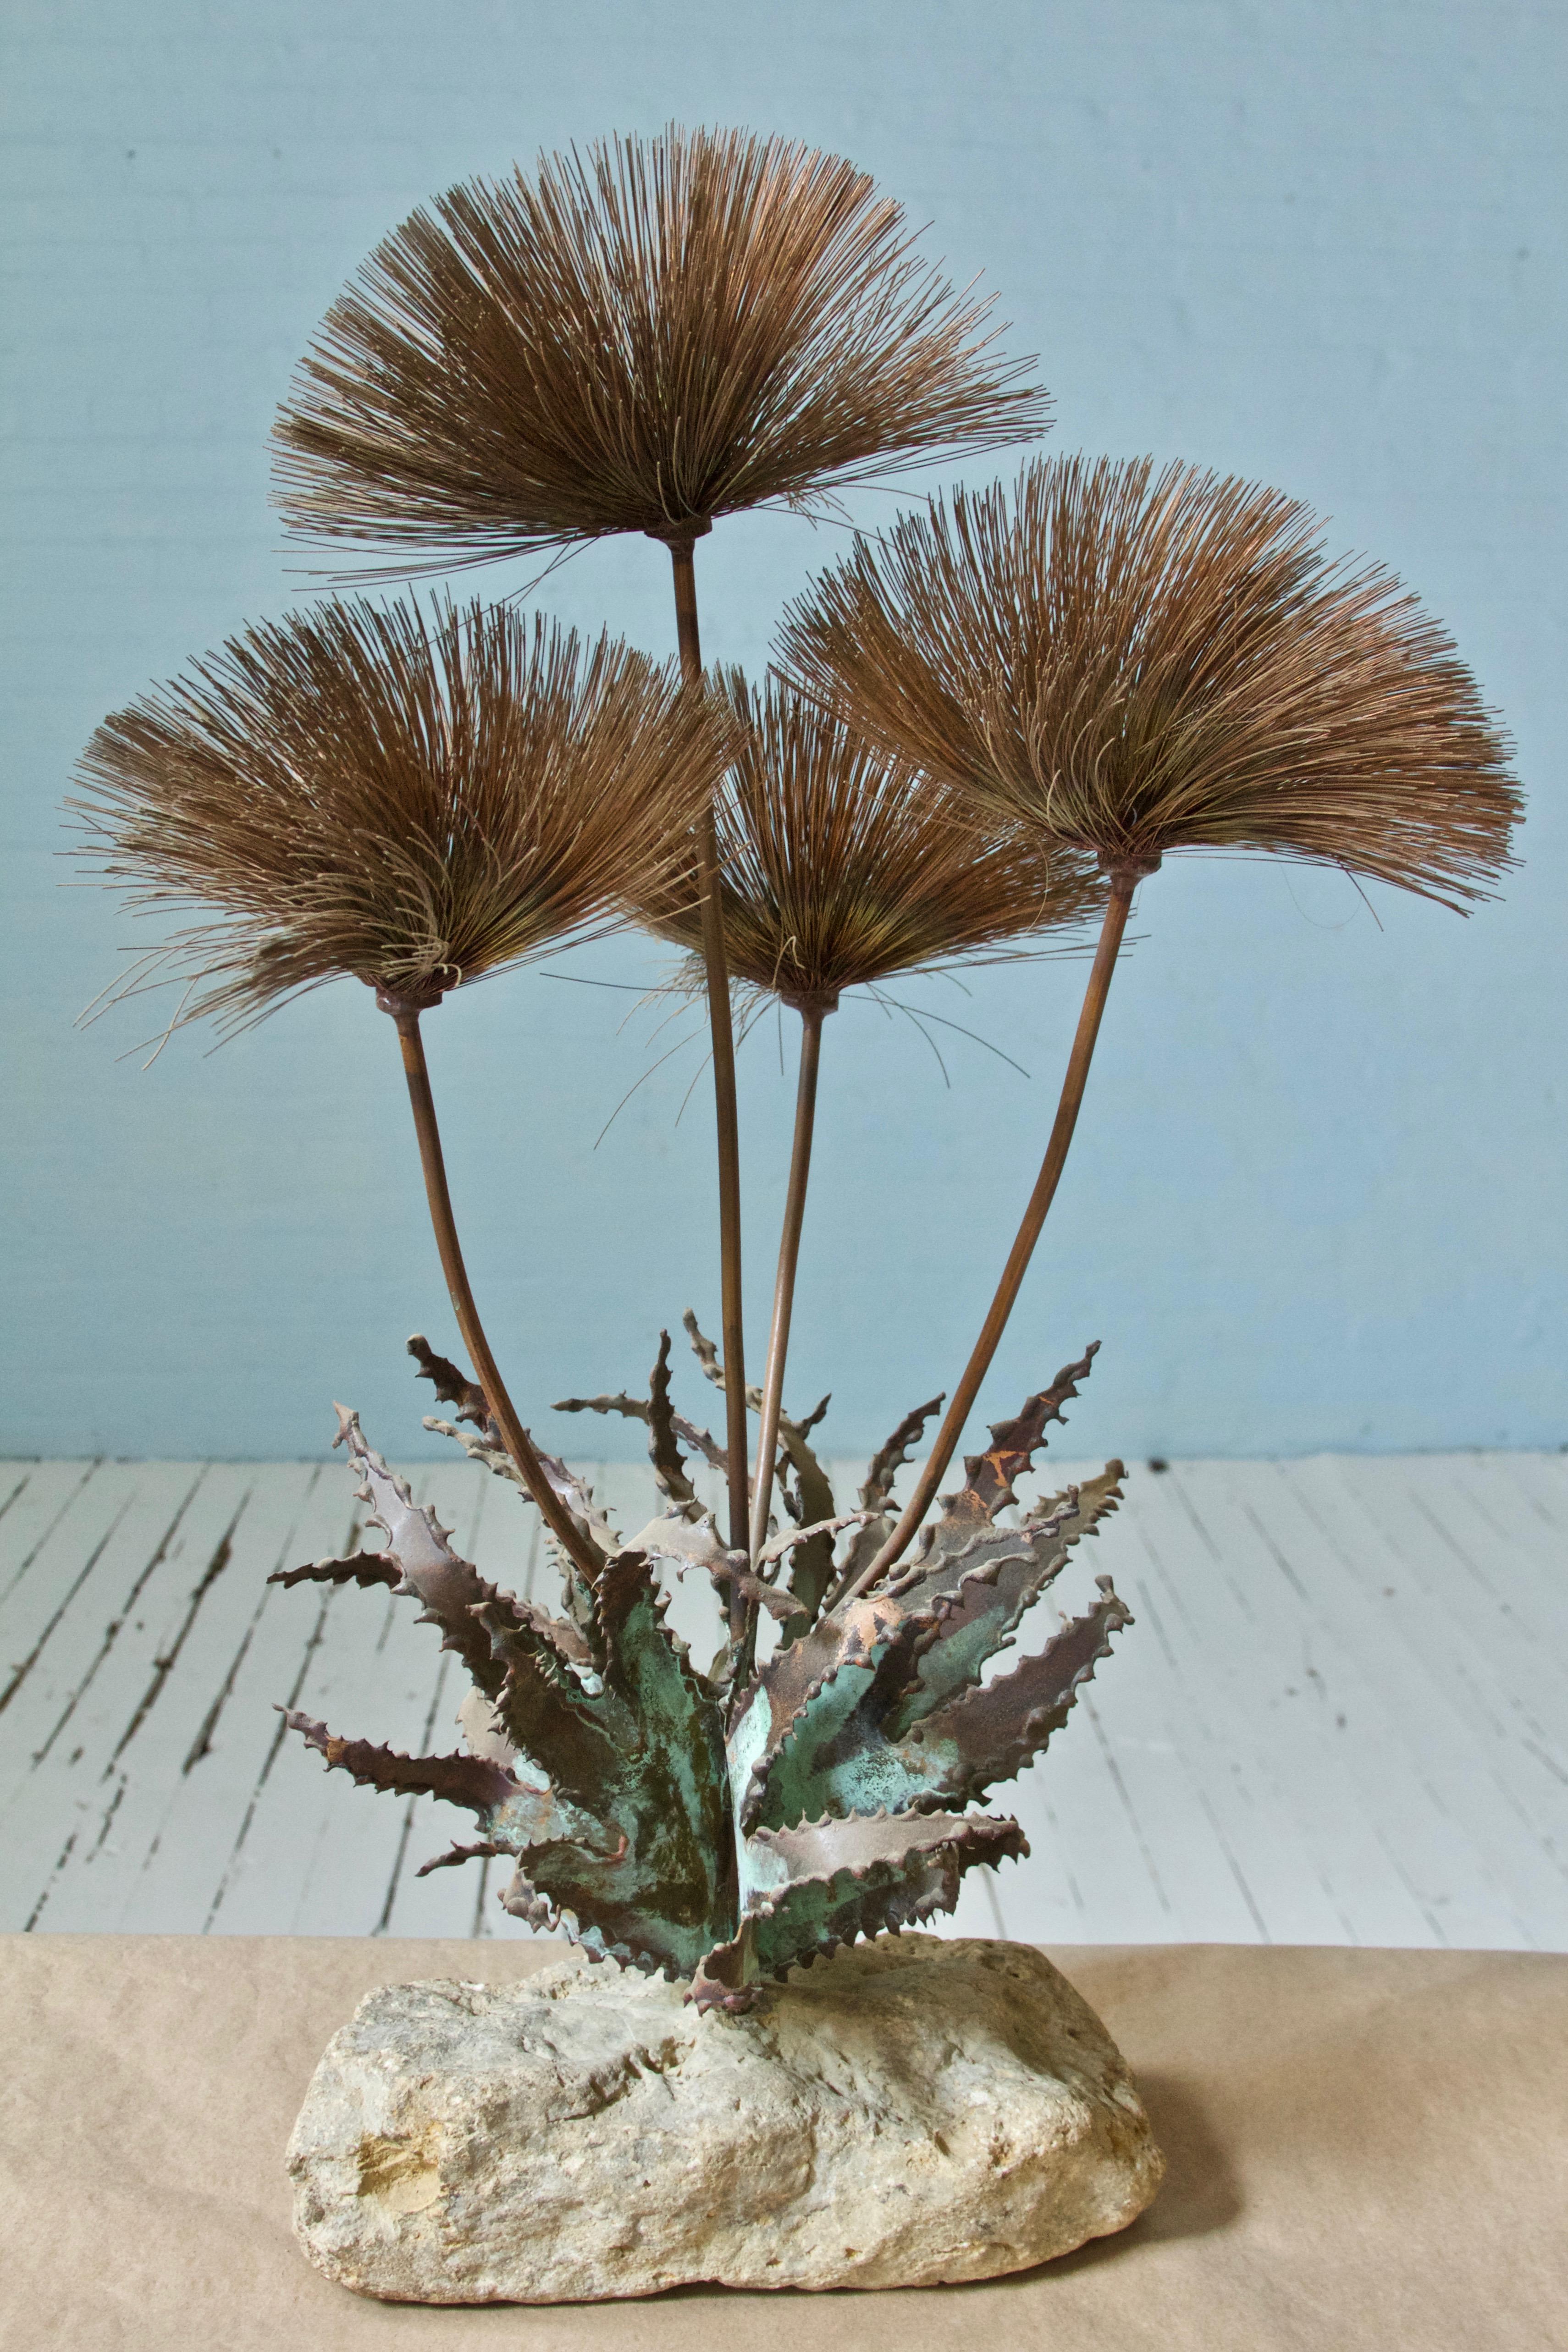 Decorative Jere-style Brutalist desert flowers made of metal brass or copper, mounted to a solid stone base. Sculpture attributed to artist John Steck.